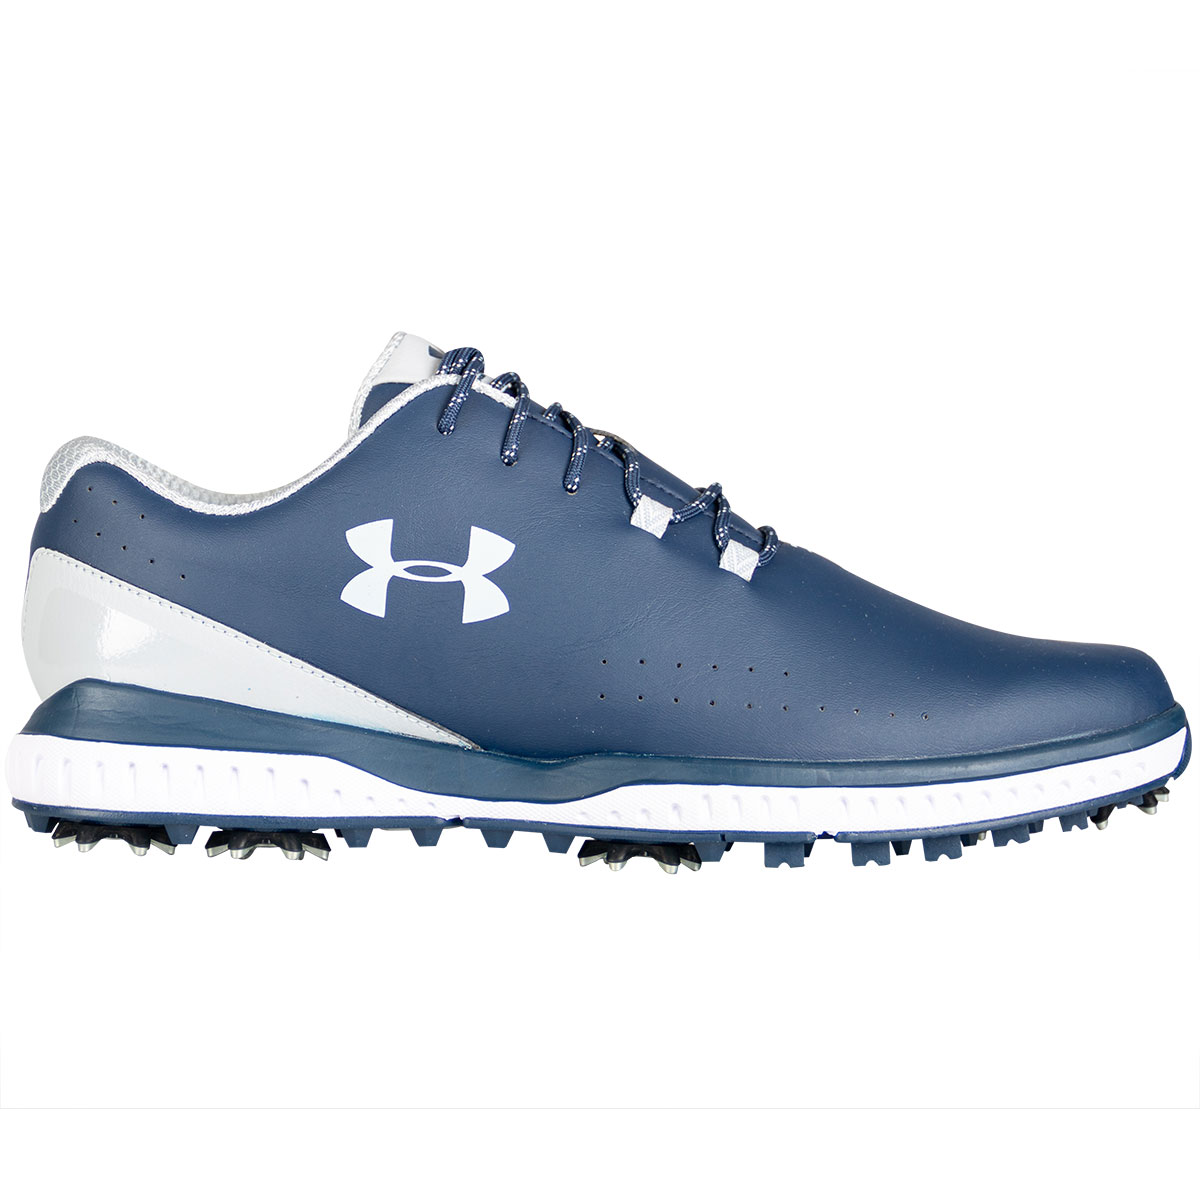 black and teal under armour shoes